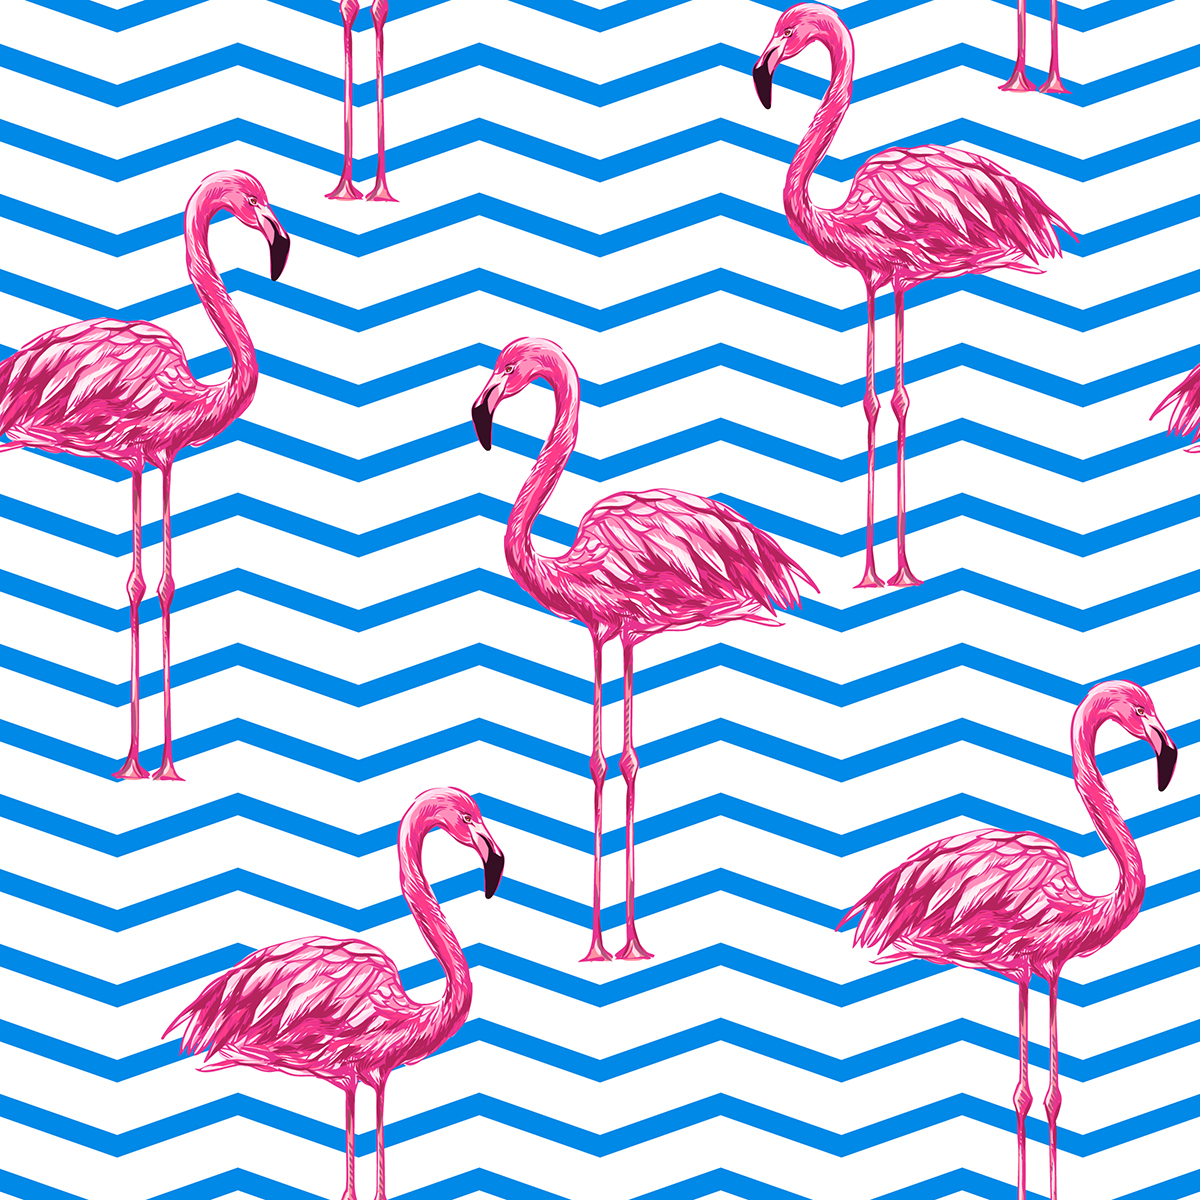 A pattern of pink flamingos